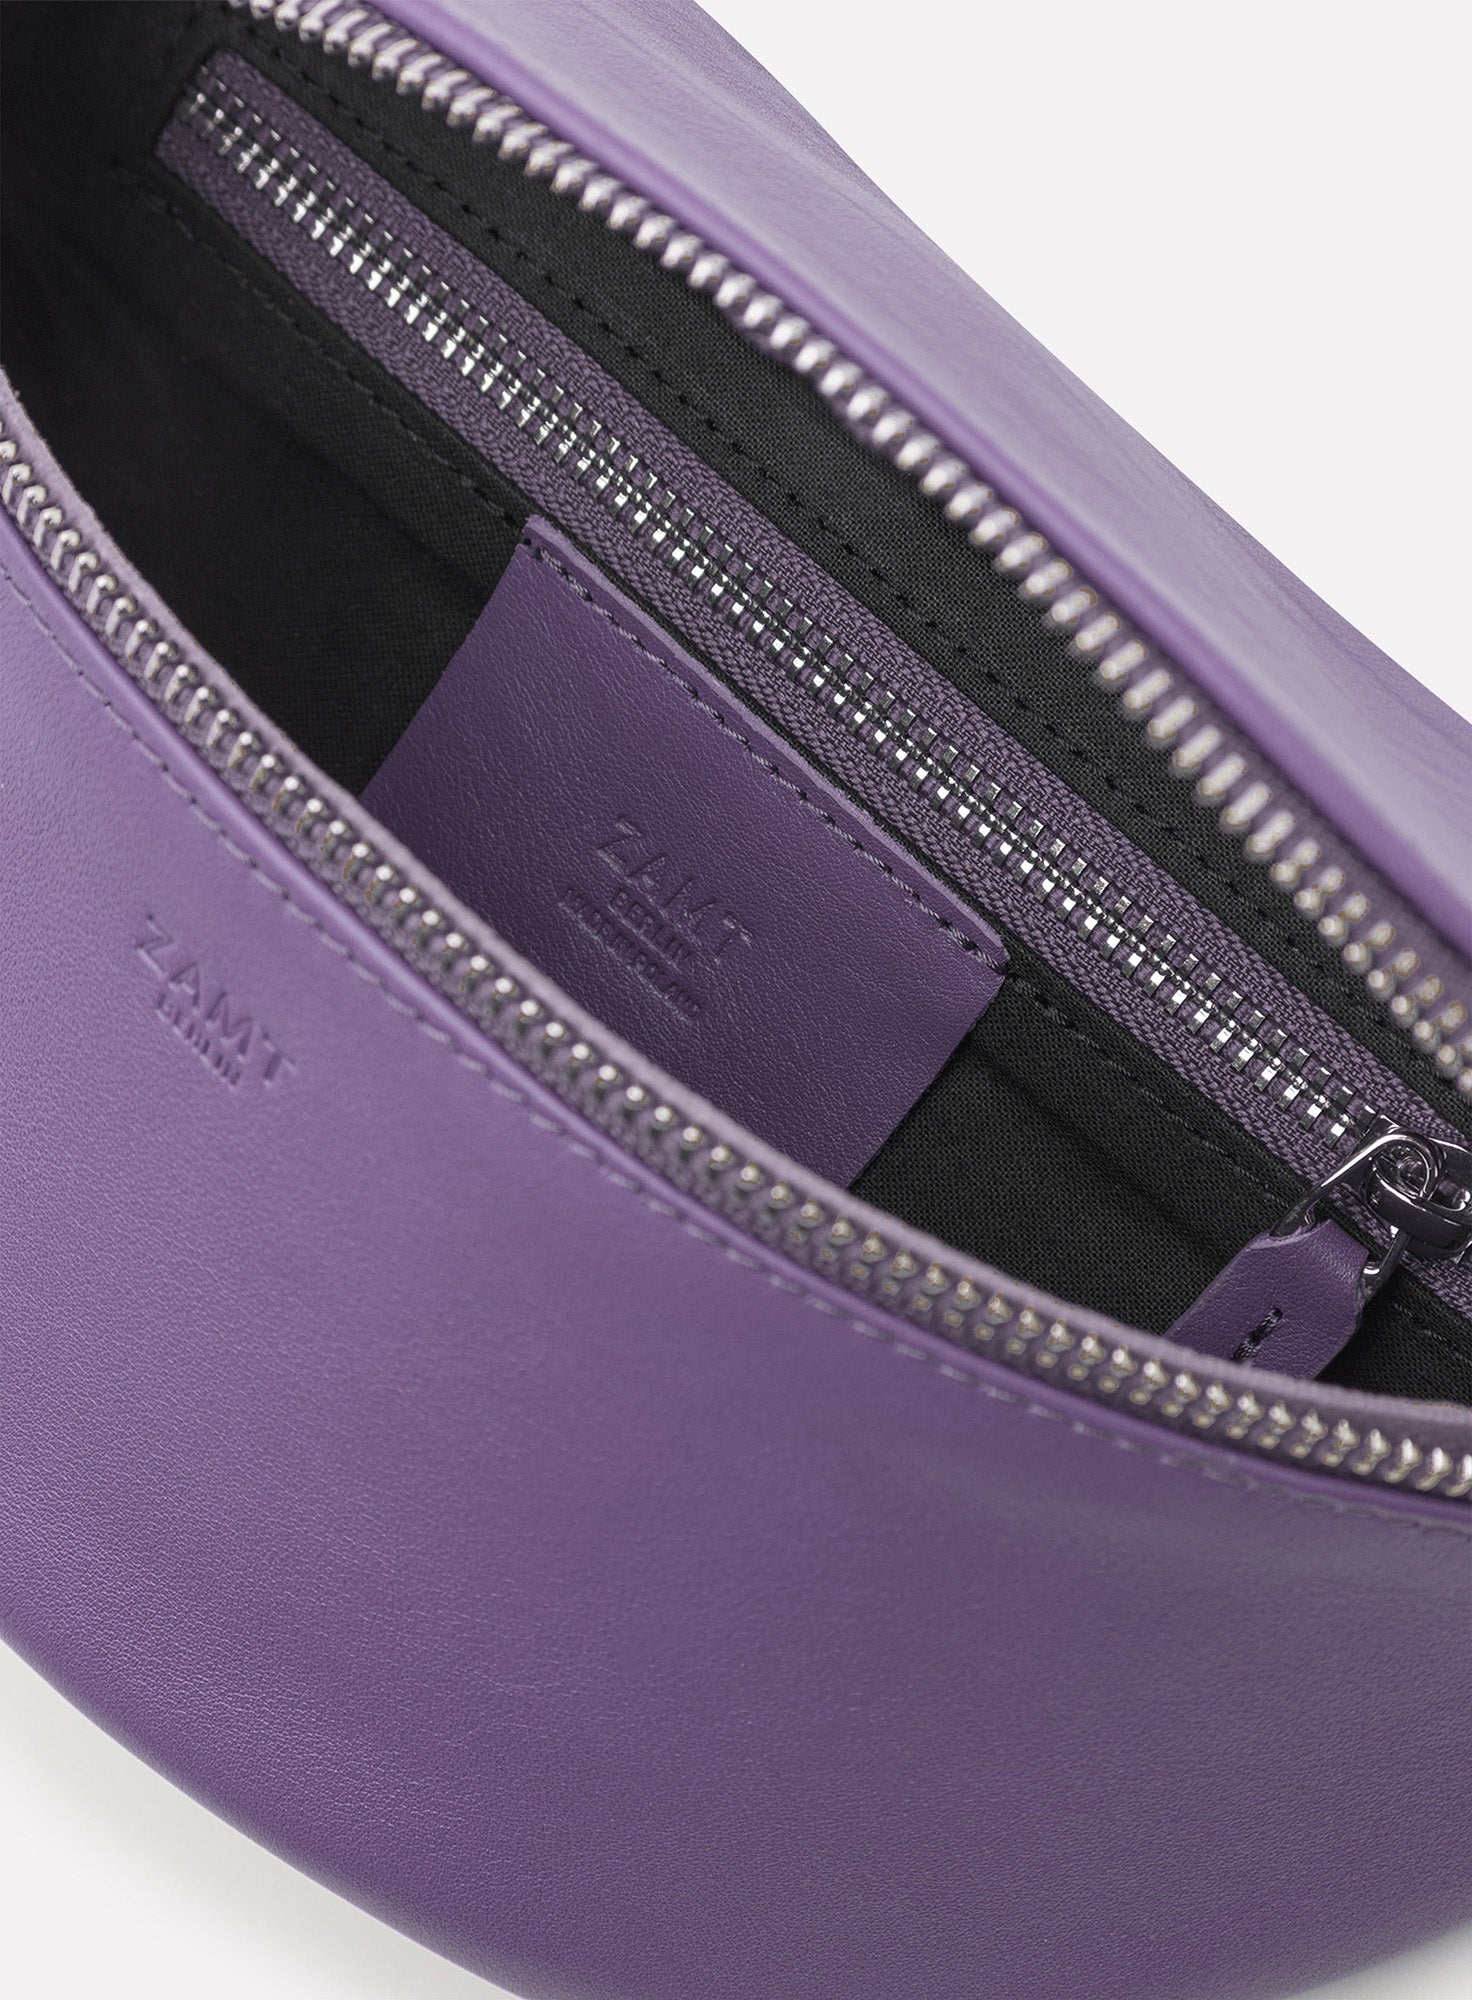 HIP_BAG_CAN_Lavender_Designed_in_Berlin_Made_to_last_Handmade_in_Poland..